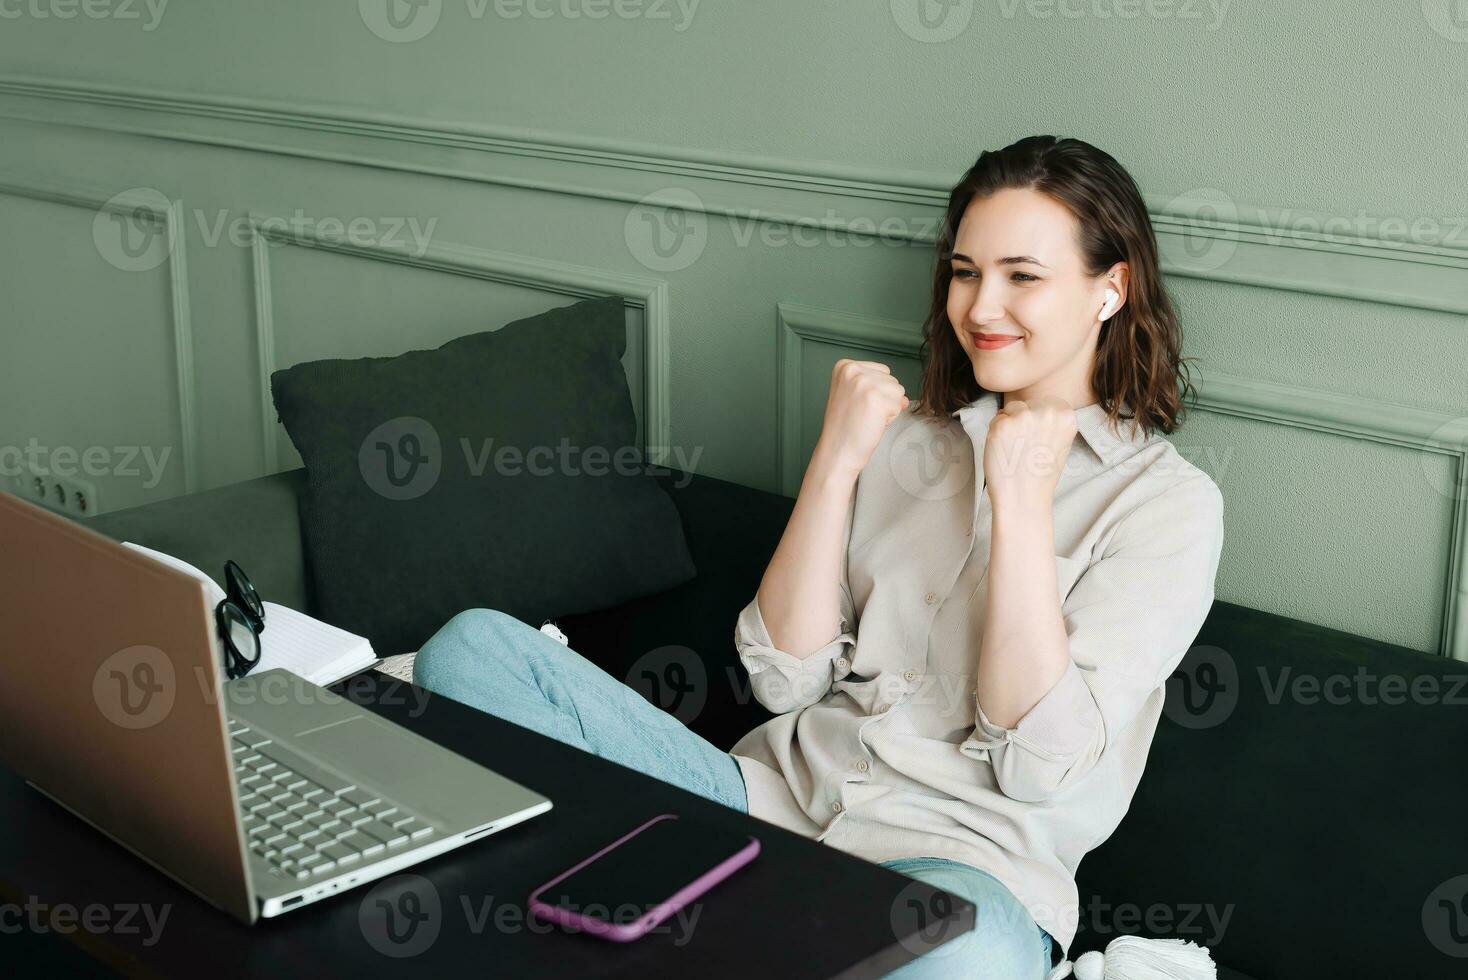 Winning and celebrating. Smiling woman gesturing in a successful video chat on her laptop. Happy woman in glasses is beaming as she communicates on her laptop, signalling victory and success. photo